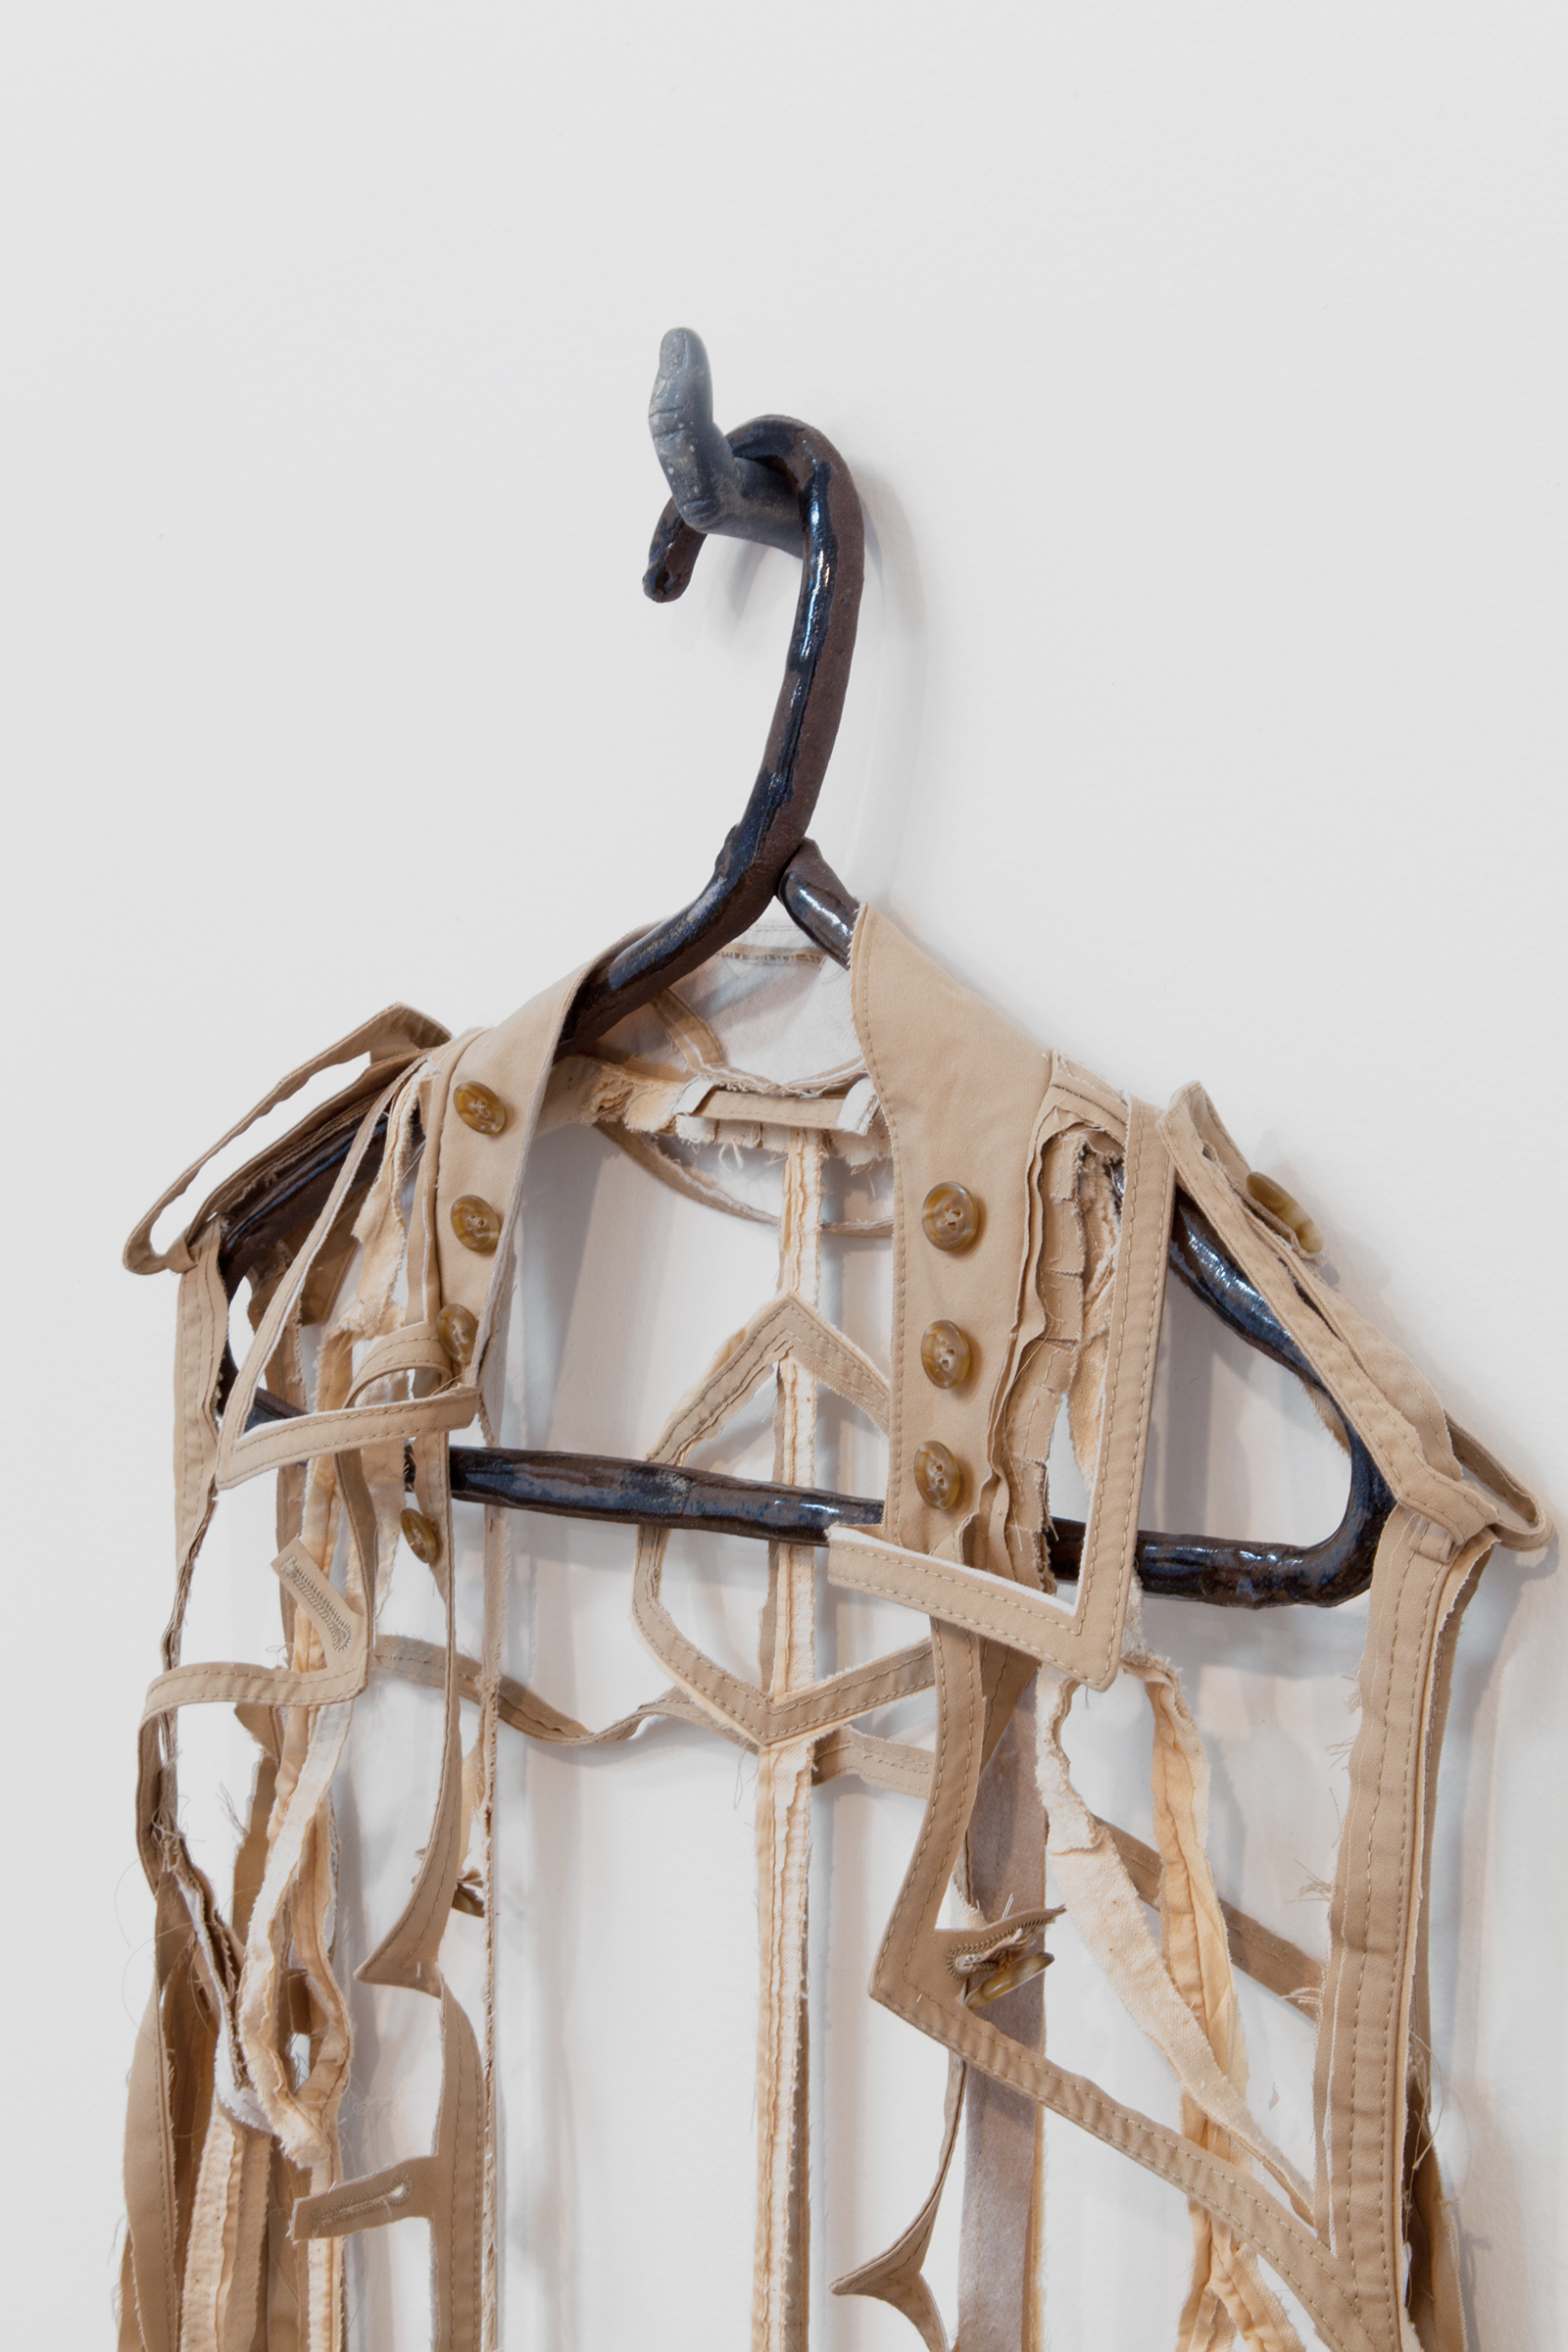   ANNA SEW HOY  (detail)  beige/tan , fired stoneware, trench coat and resin finger hook, 62.5" x 17" x 4", 2012 